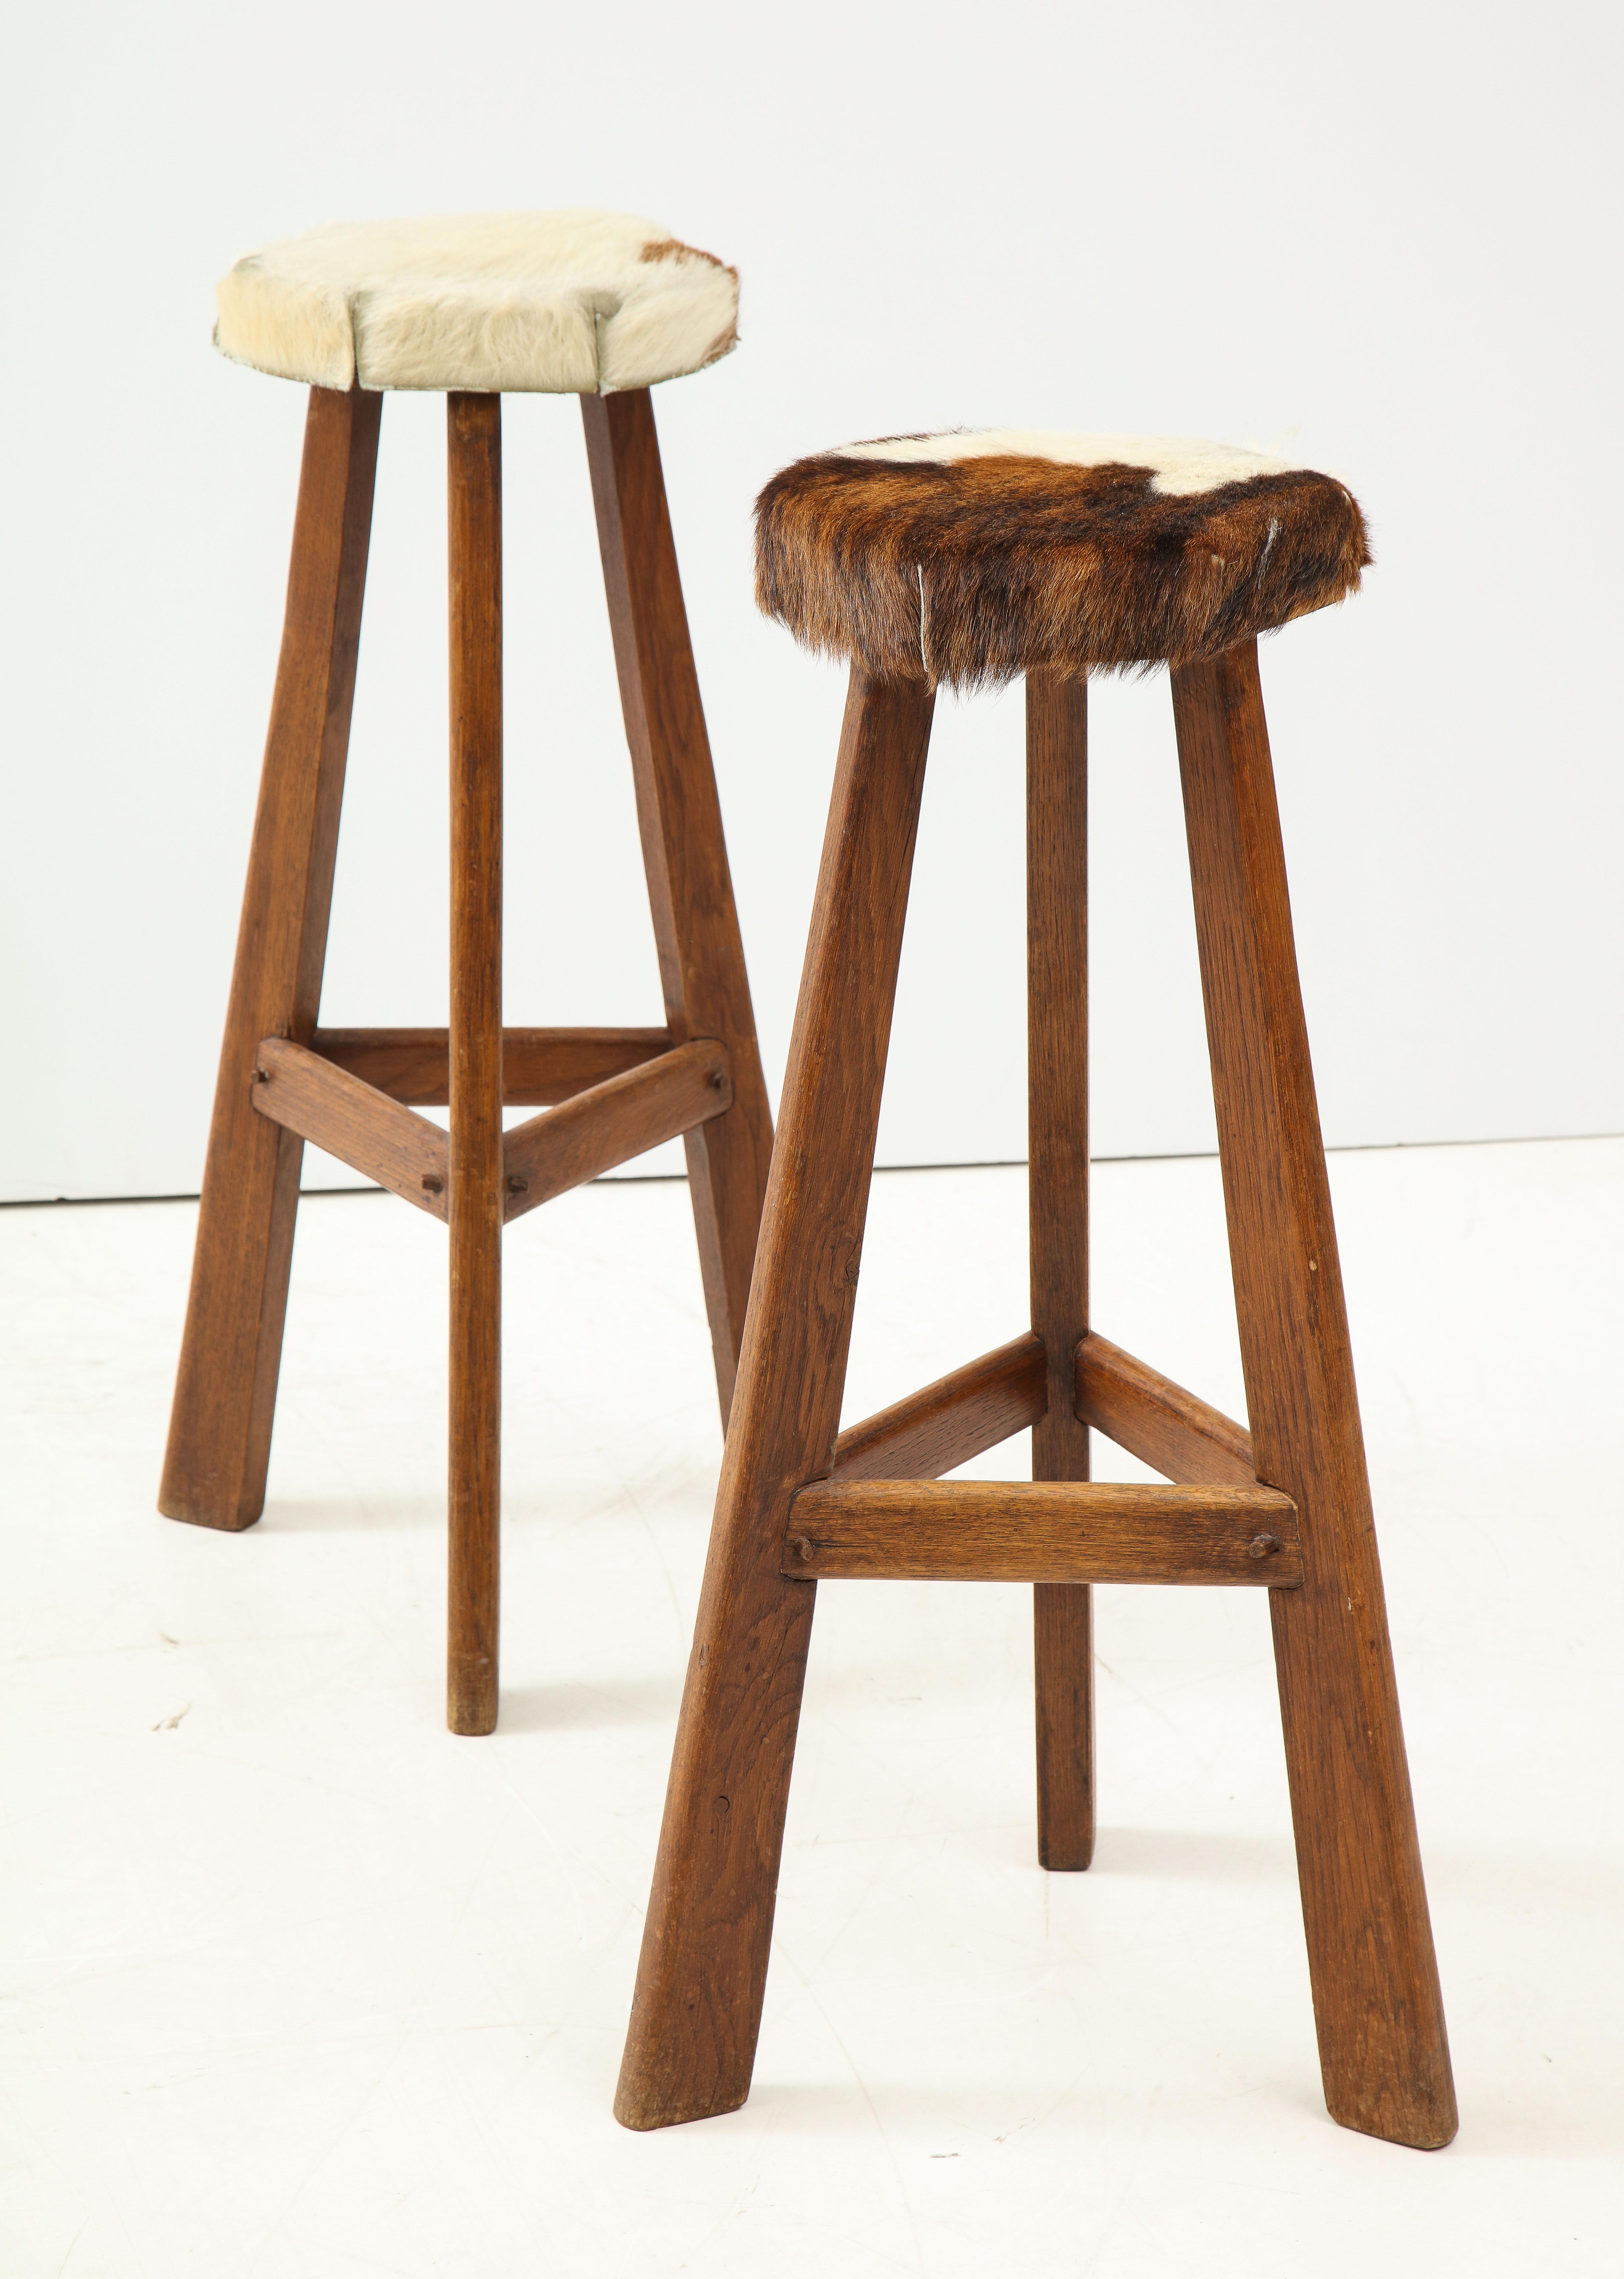 Pair of Midcentury Stools with Cowhide Seats, France, circa 1960 In Excellent Condition For Sale In New York City, NY